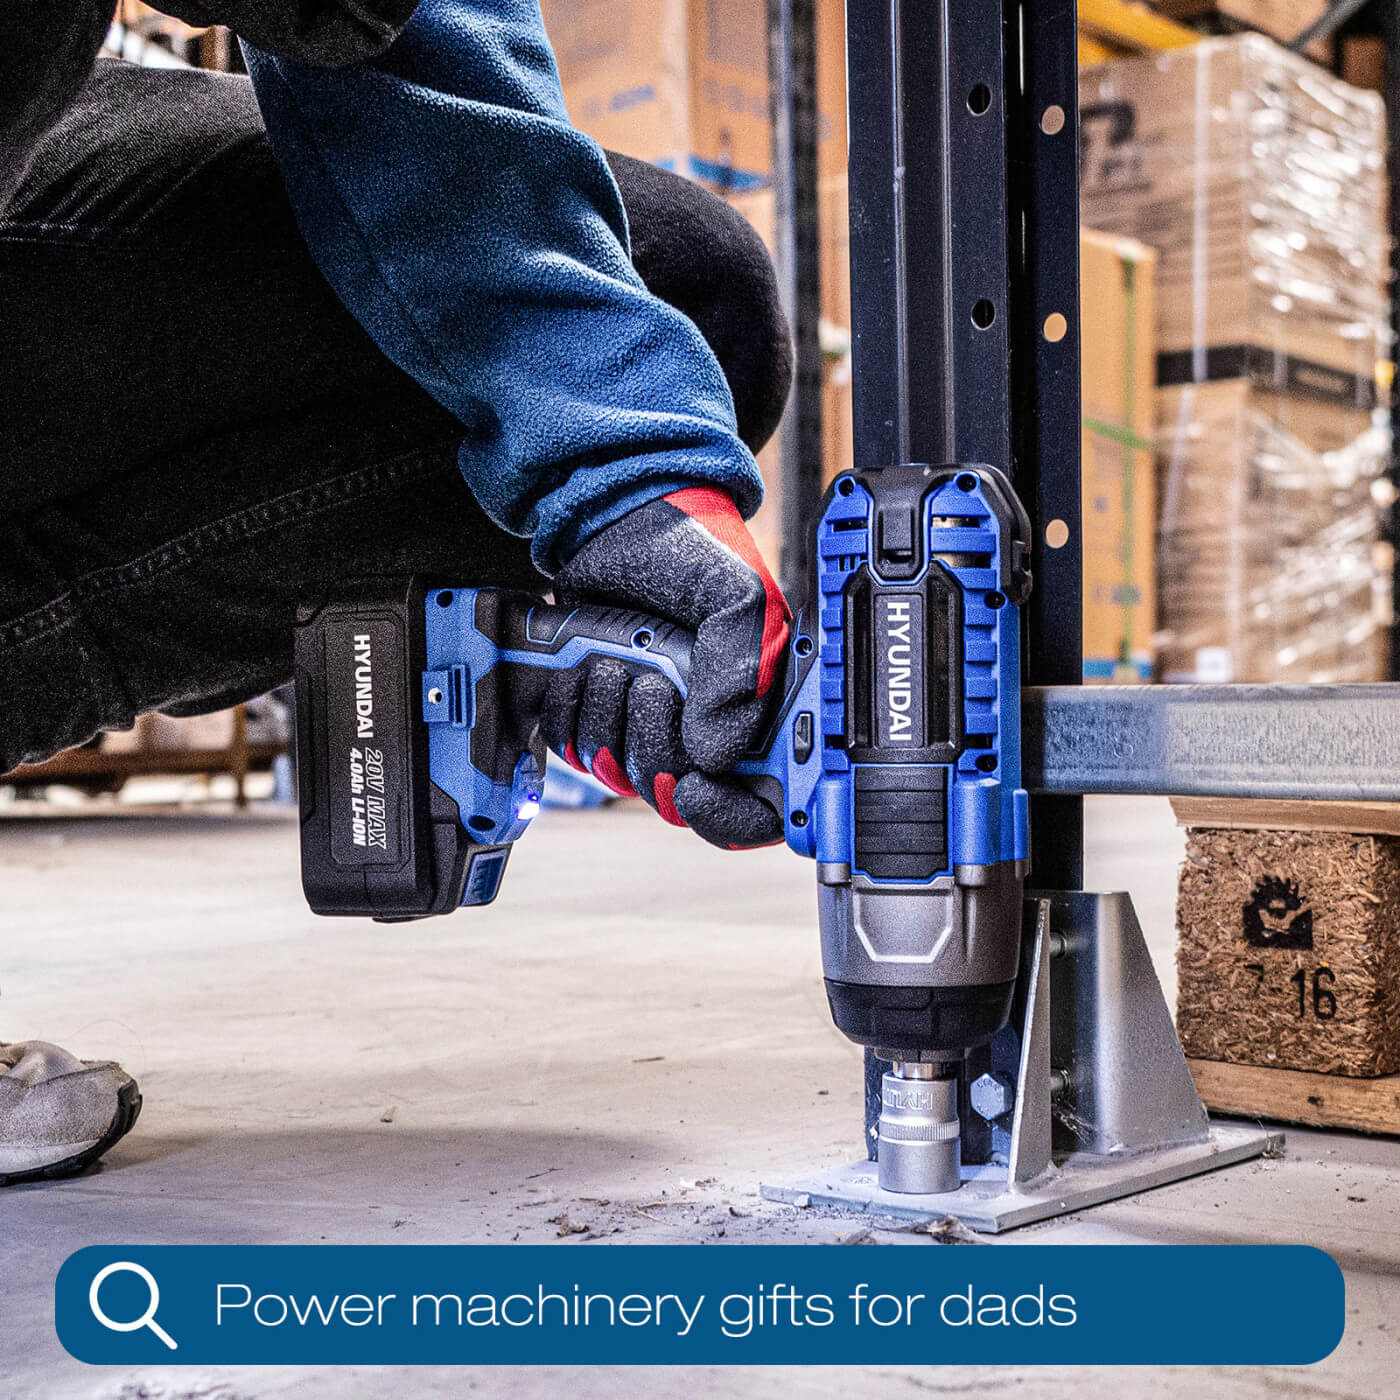 Top 10 Power Machinery Gifts for a Power Dad this Father’s Day!